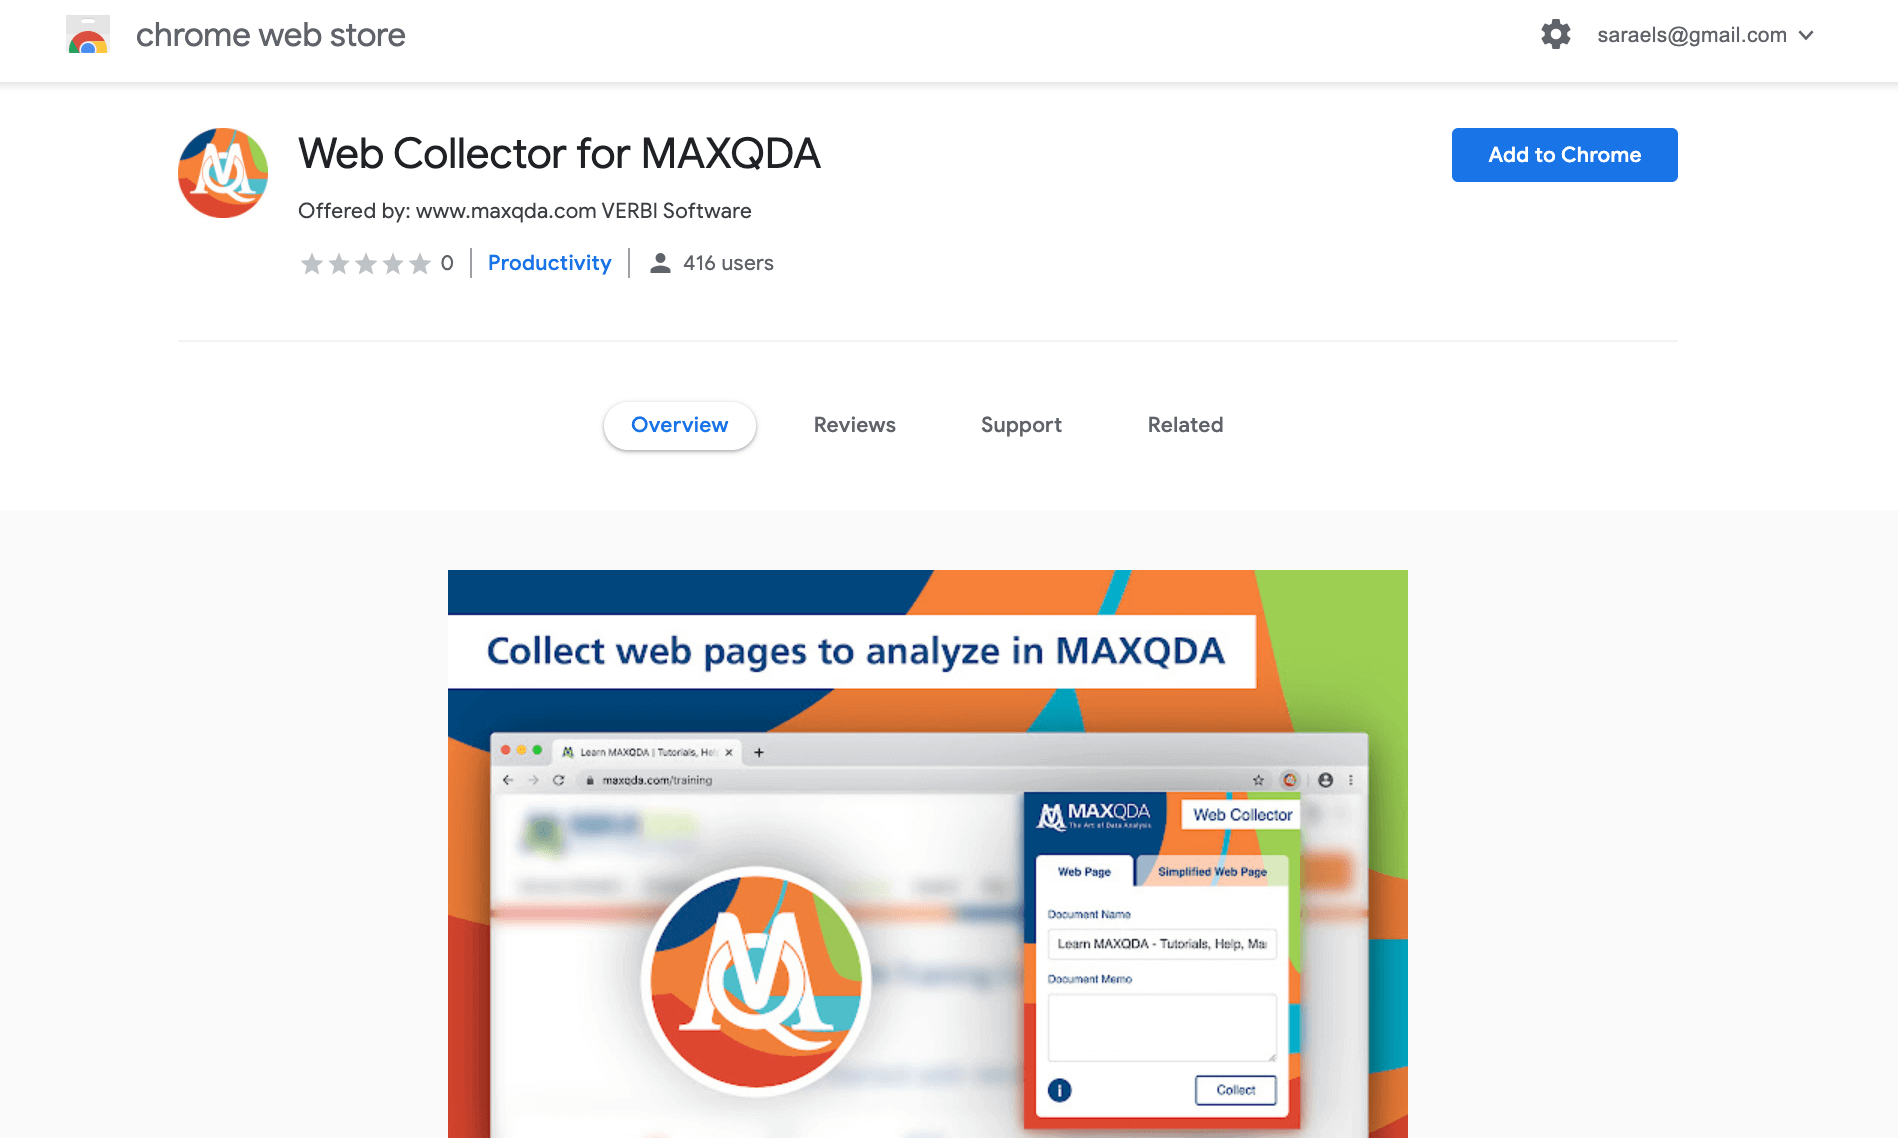 Screenshot from the Google Chrome Web Store showing the Web Collector for MAXQDA extension.